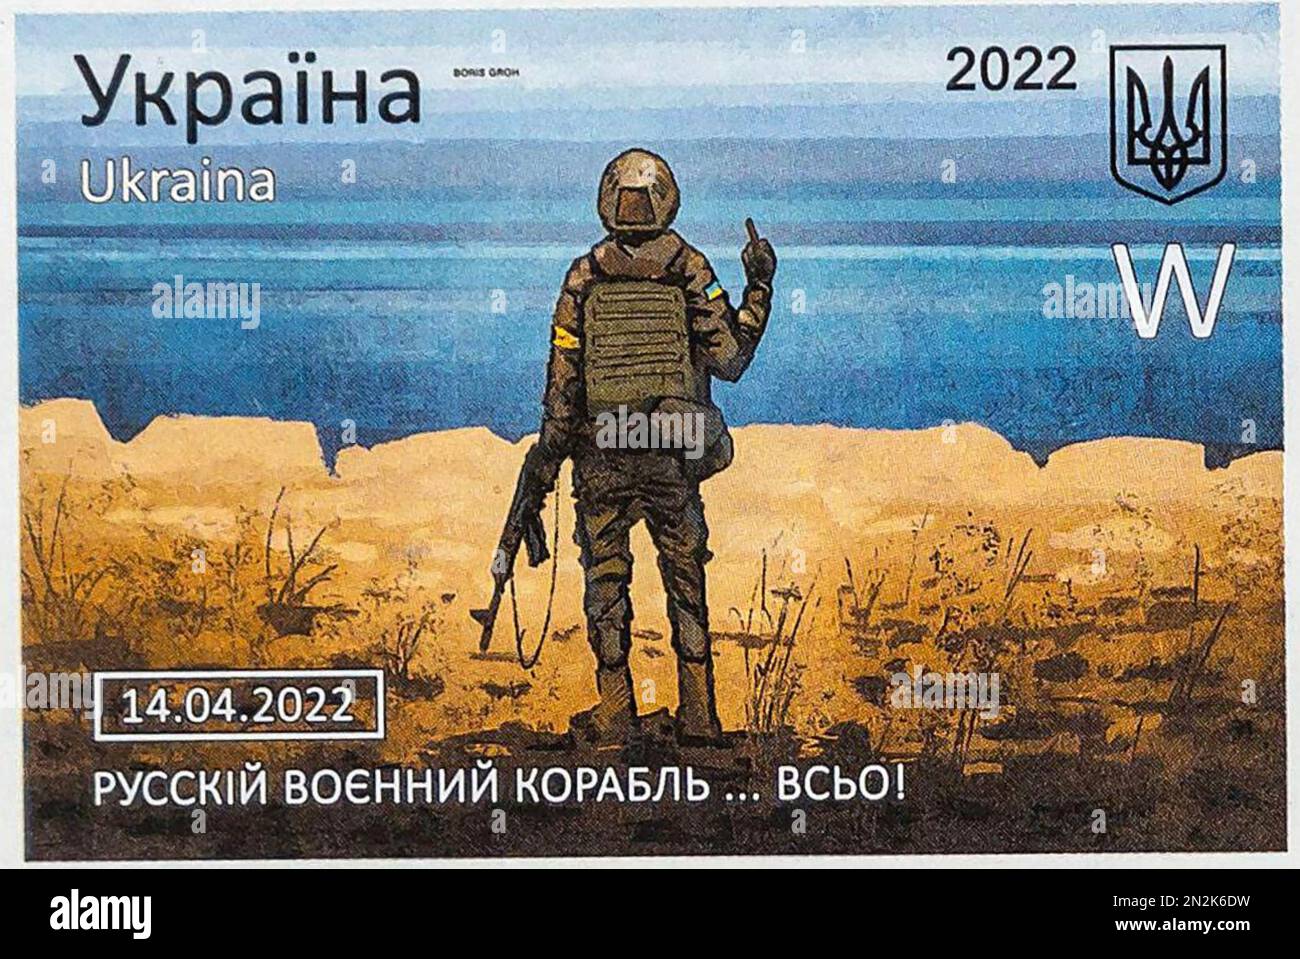 SNAKE ISLAND Ukrainian postage stamp issued in 2022 showing a Ukrainian soldier giving the finger to the Russian cruiser Moskva . The ship sank two days after the stamp was issued. Stock Photo